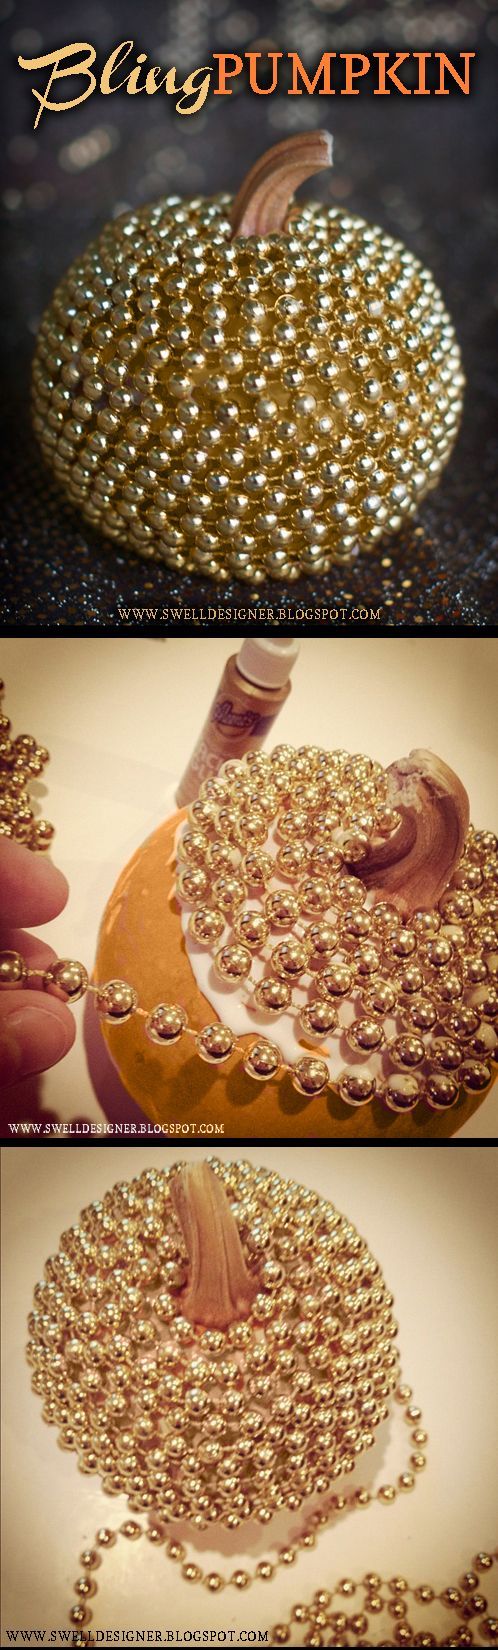 DIY: Make a cool and stylish metallic Bling Pumpkin in no time using tacky glue, gold paint, and a string